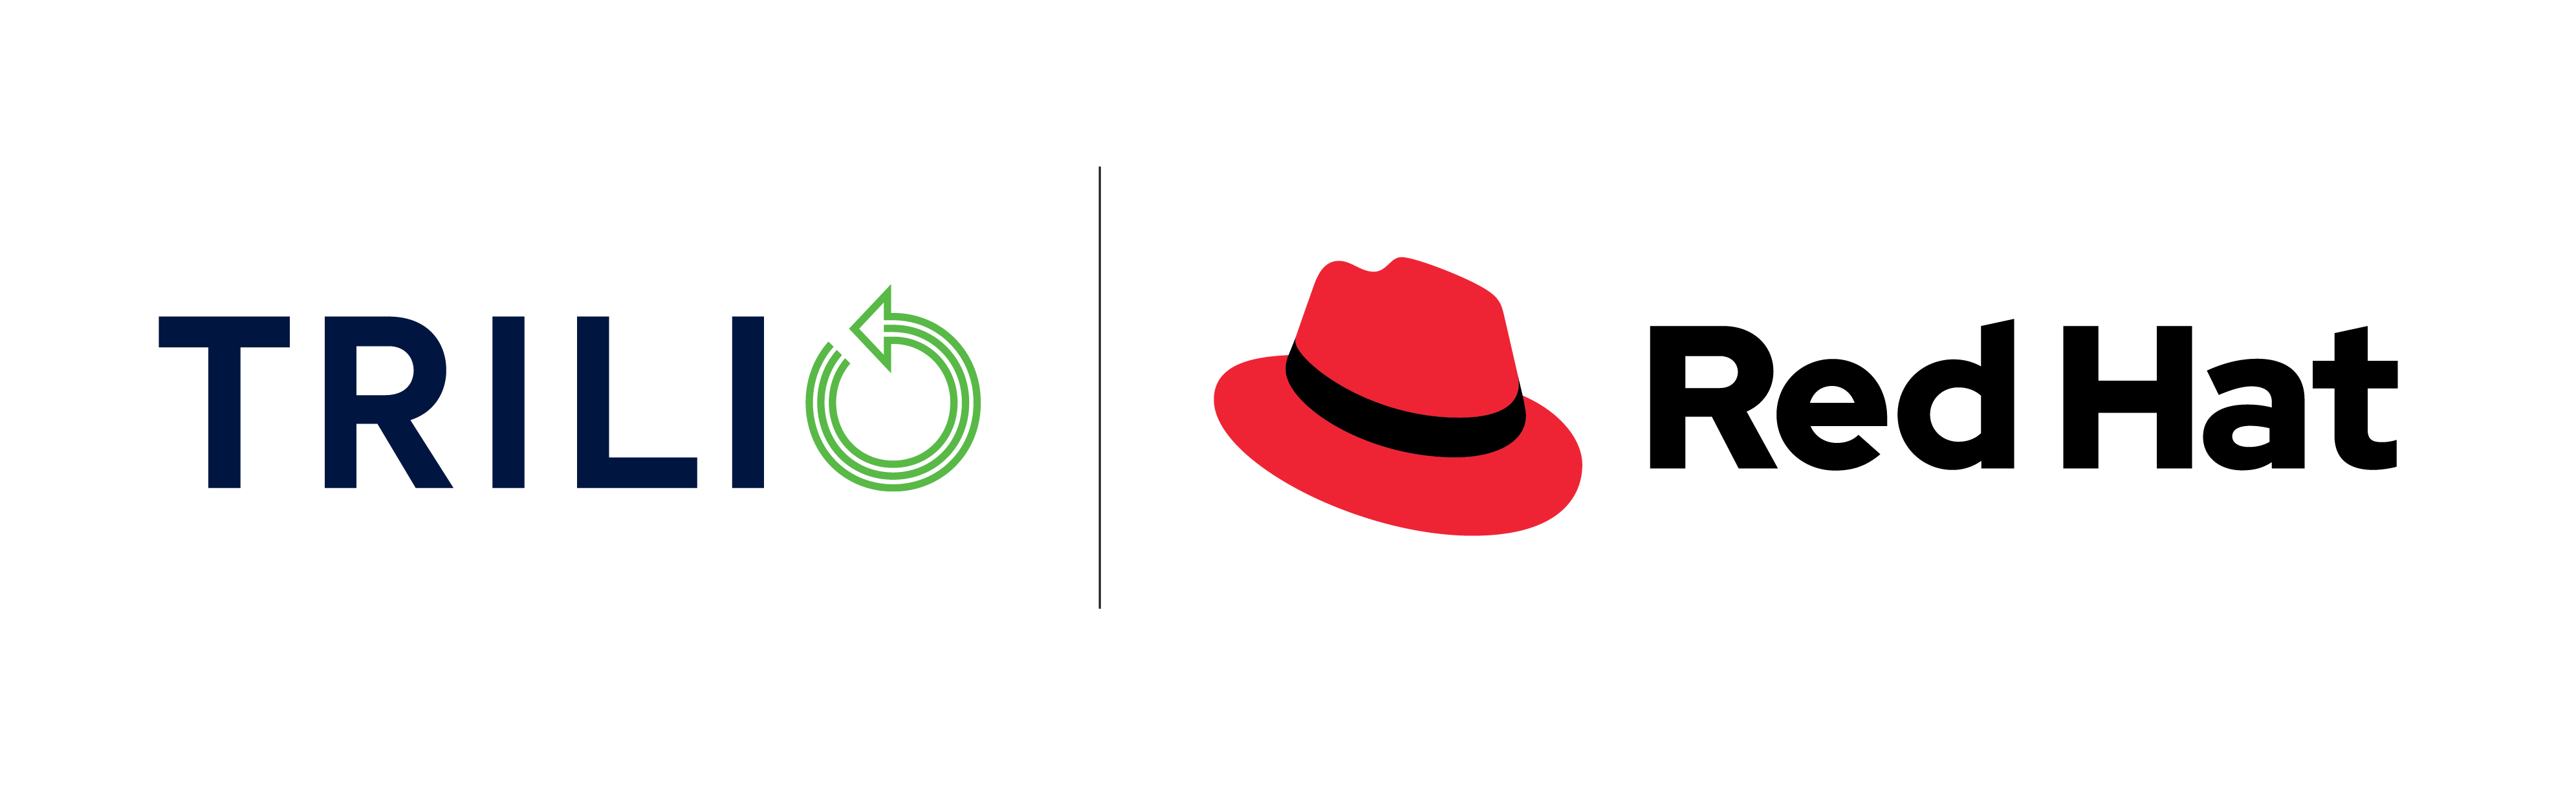 Trilio and Red Hat logos together